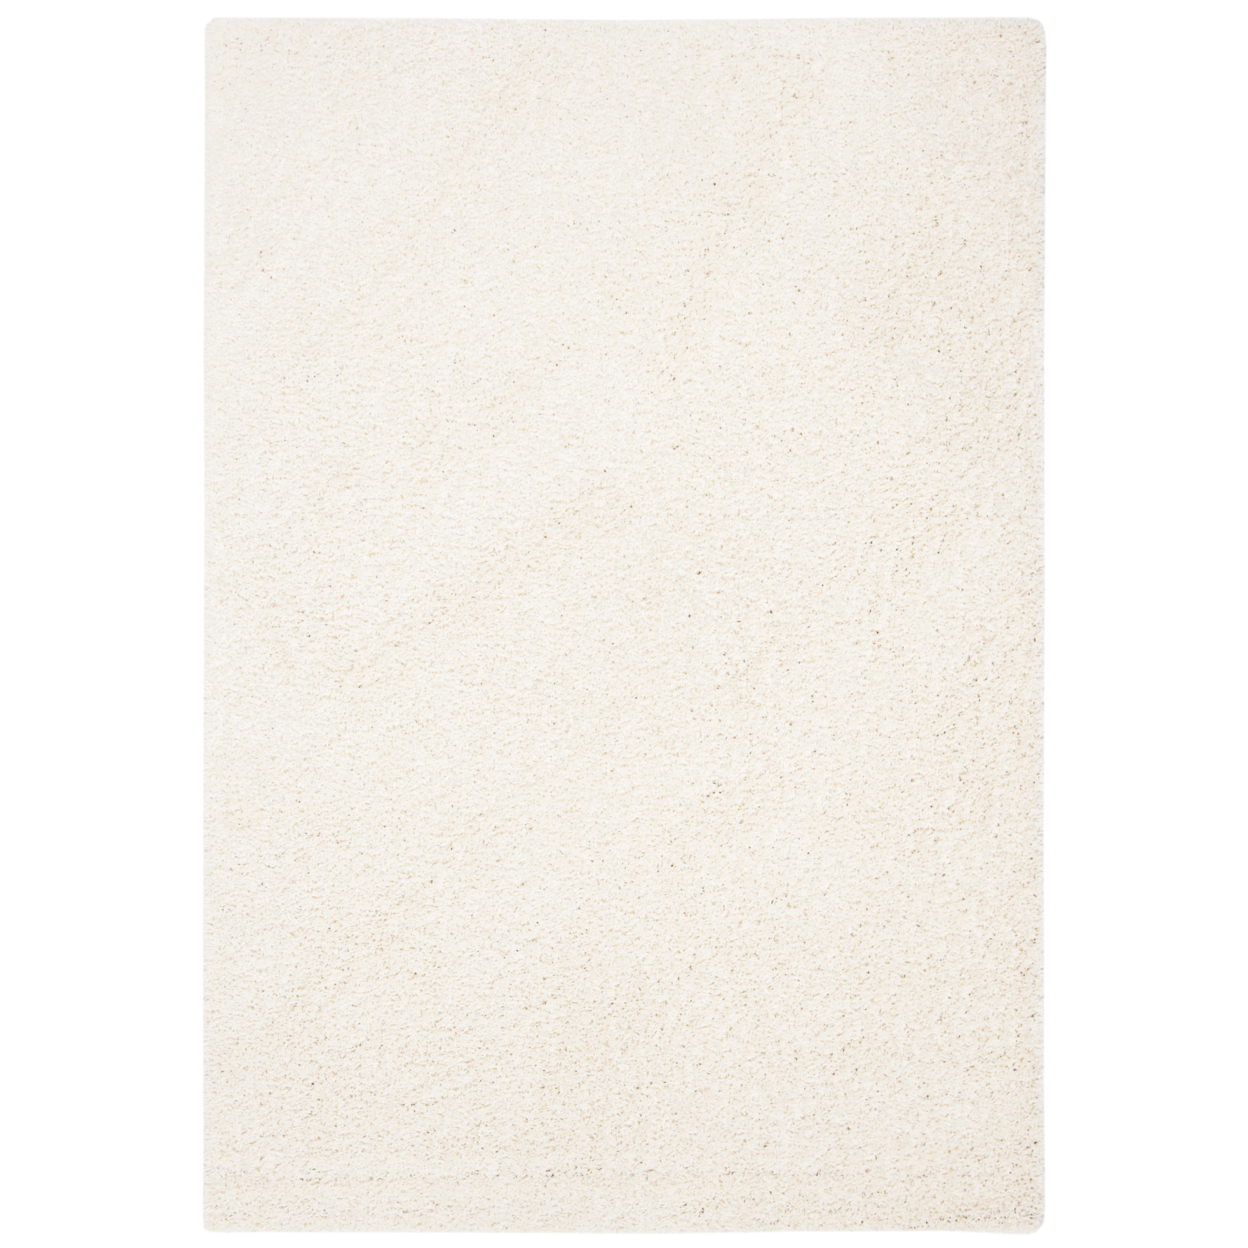 SAFAVIEH Primo Shag Collection PRM300A Ivory Rug - 3' X 5'